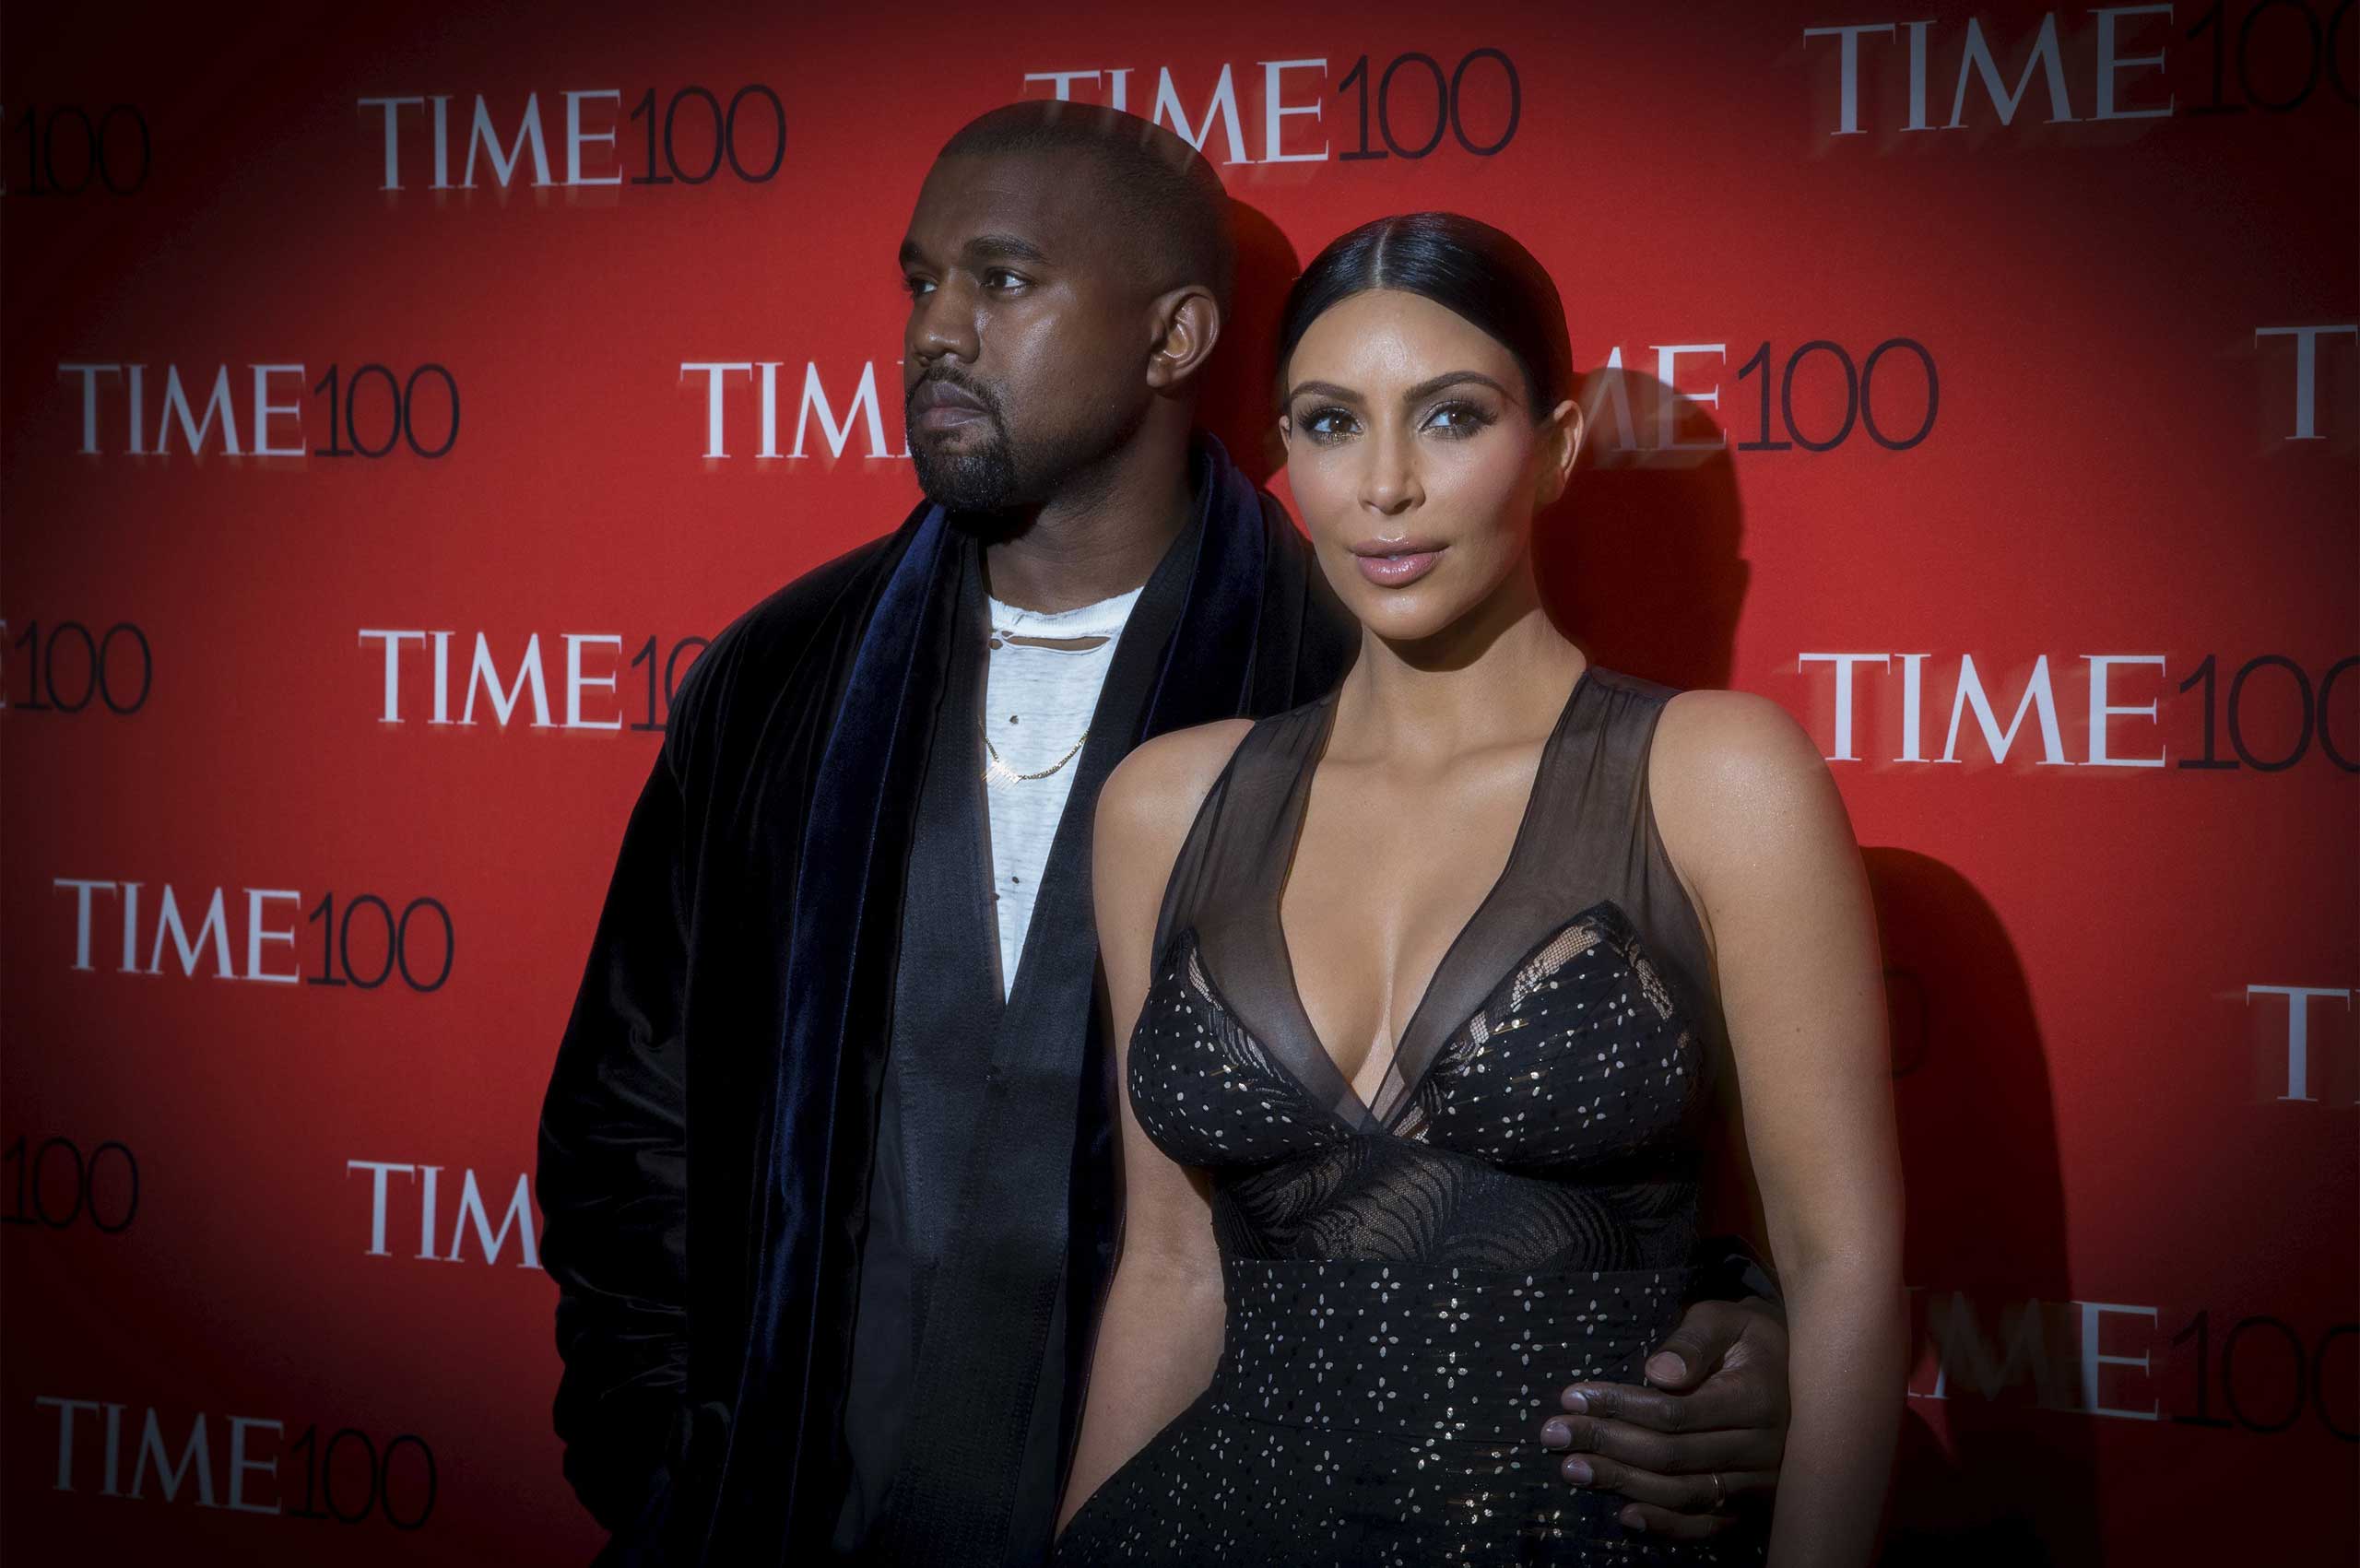 Kanye West and Kim Kardashian West attend the TIME 100 Gala at Jazz at Lincoln Center in New York City on April 21, 2015.